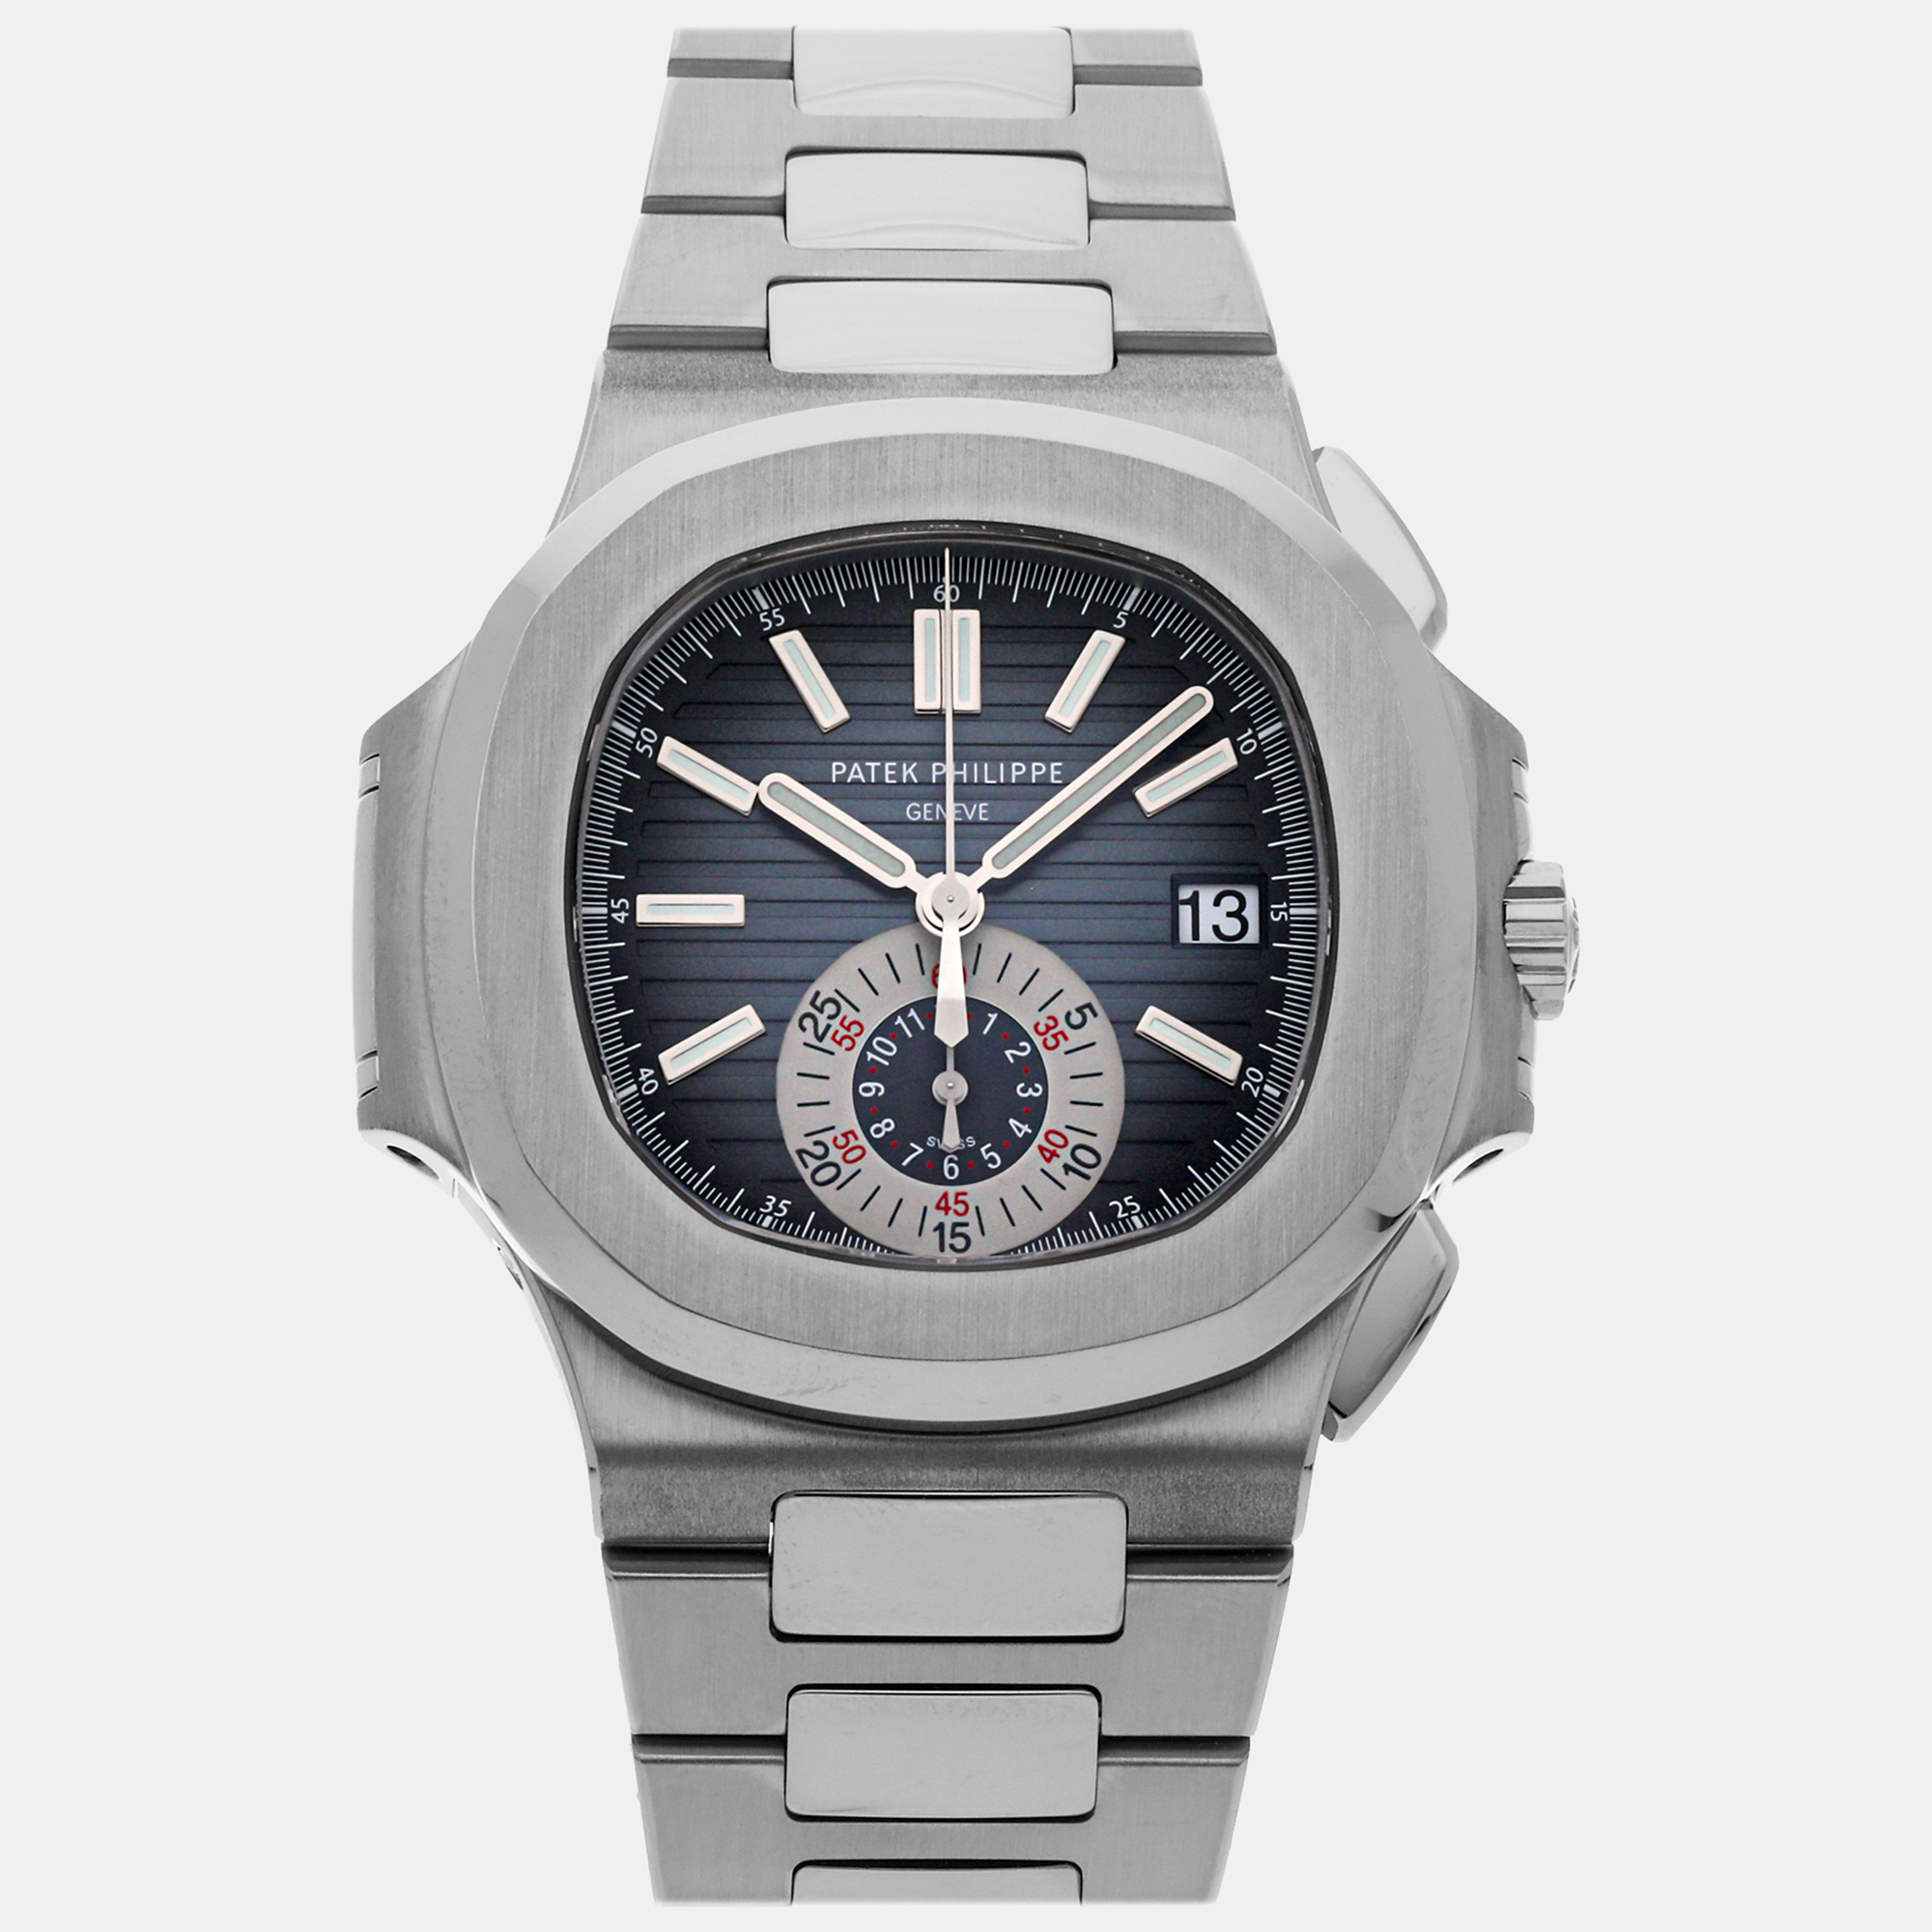 A meticulously crafted watch holds the promise of enduring appeal all day comfort and investment value. Carefully assembled and finished to stand out on your wrist this Patek Philippe timepiece is a purchase you will cherish.